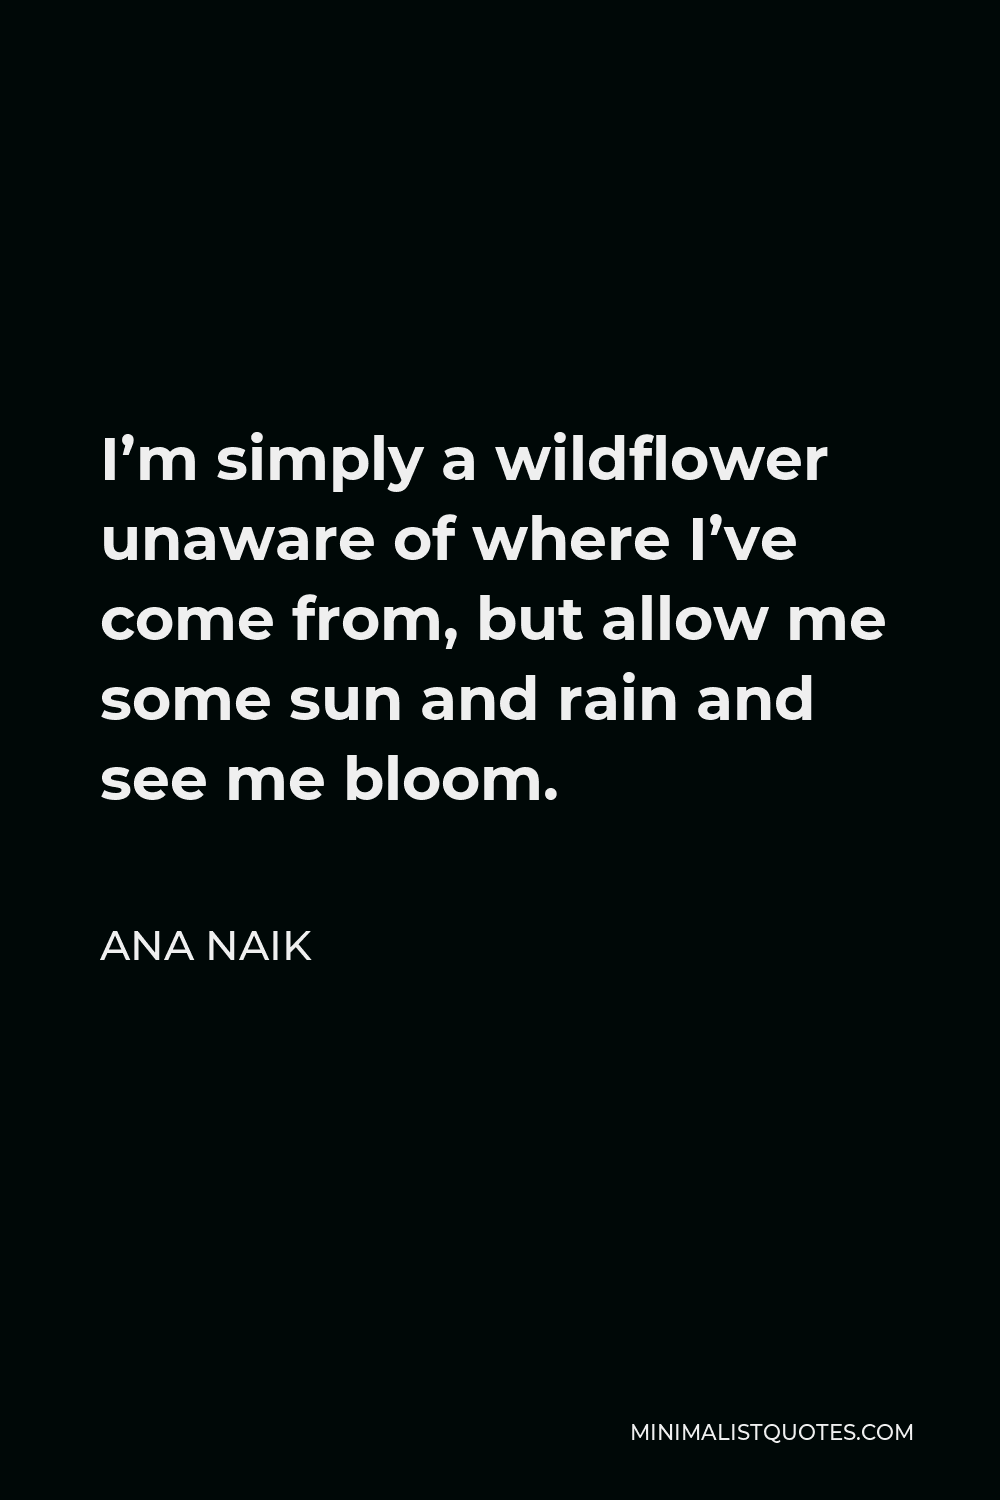 Ana Naik Quote - I’m simply a wildflower unaware of where I’ve come from, but allow me some sun and rain and see me bloom.